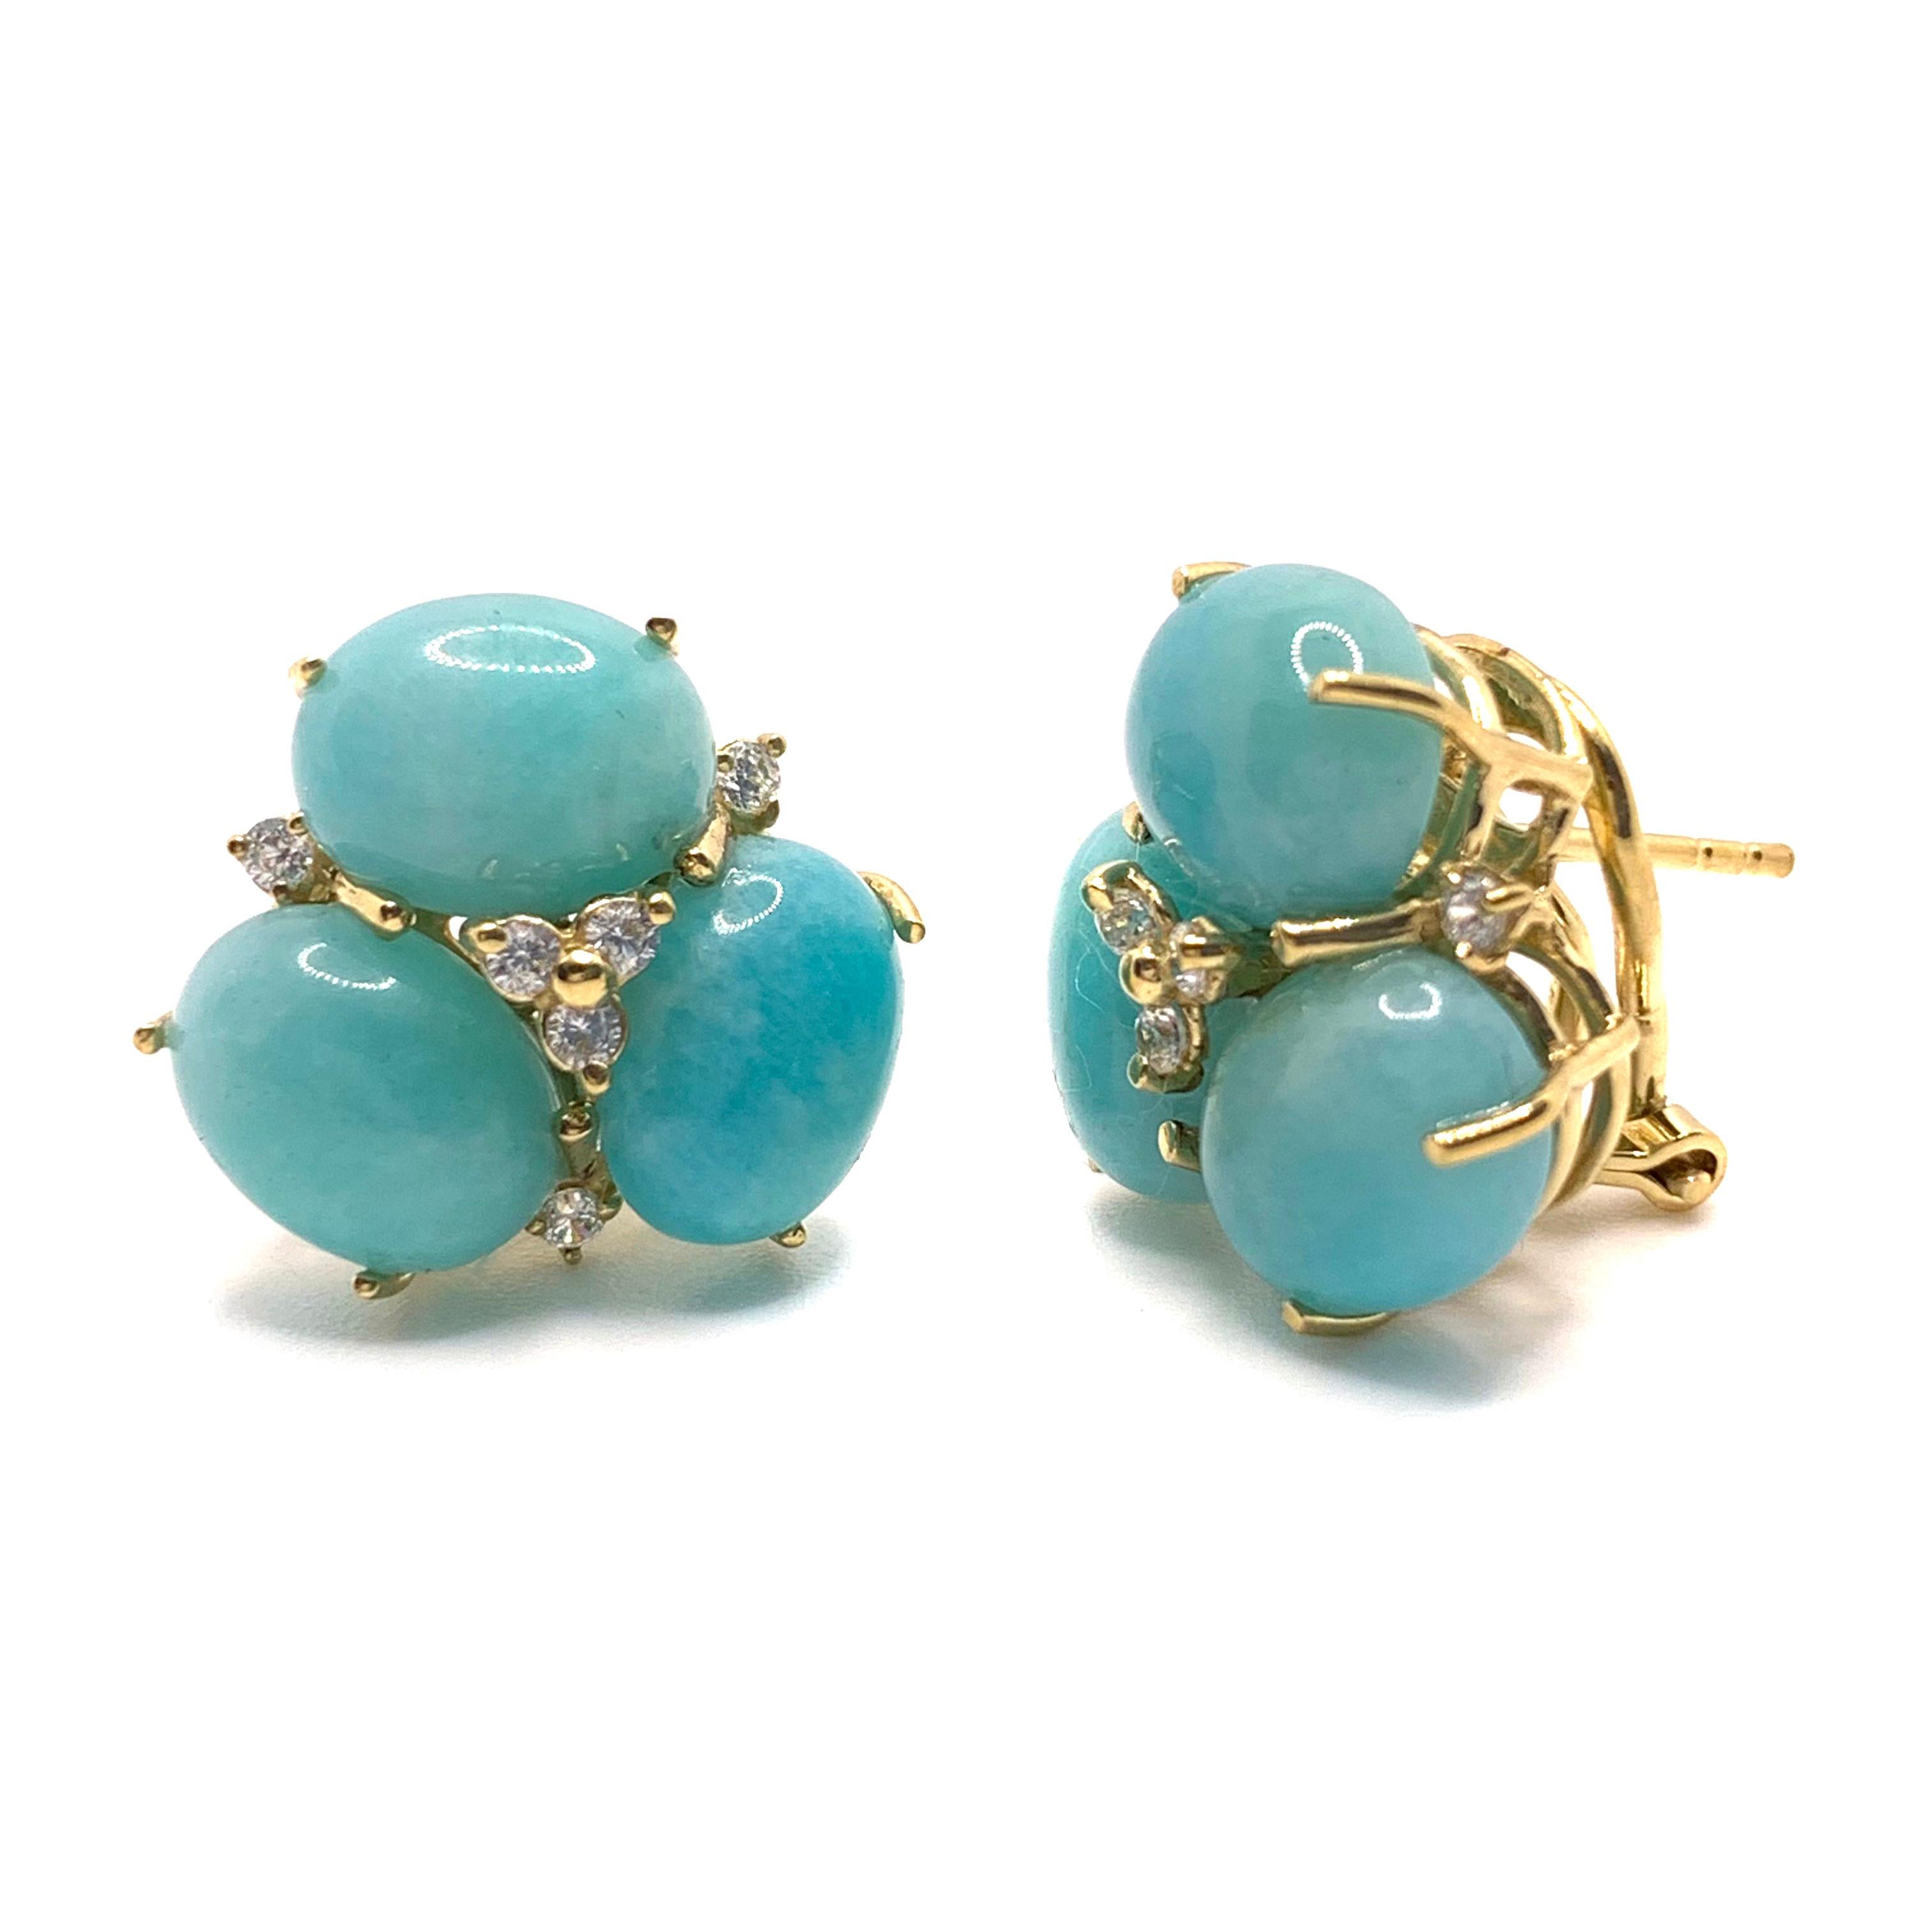 These stunning pair of earrings feature sets of oval cabochon-cut amazonite adorned with round simulated diamonds, handset in 18k yellow gold vermeil over sterling silver. The amazonite stones have vibrant blue-green hue and produce beautiful shiny